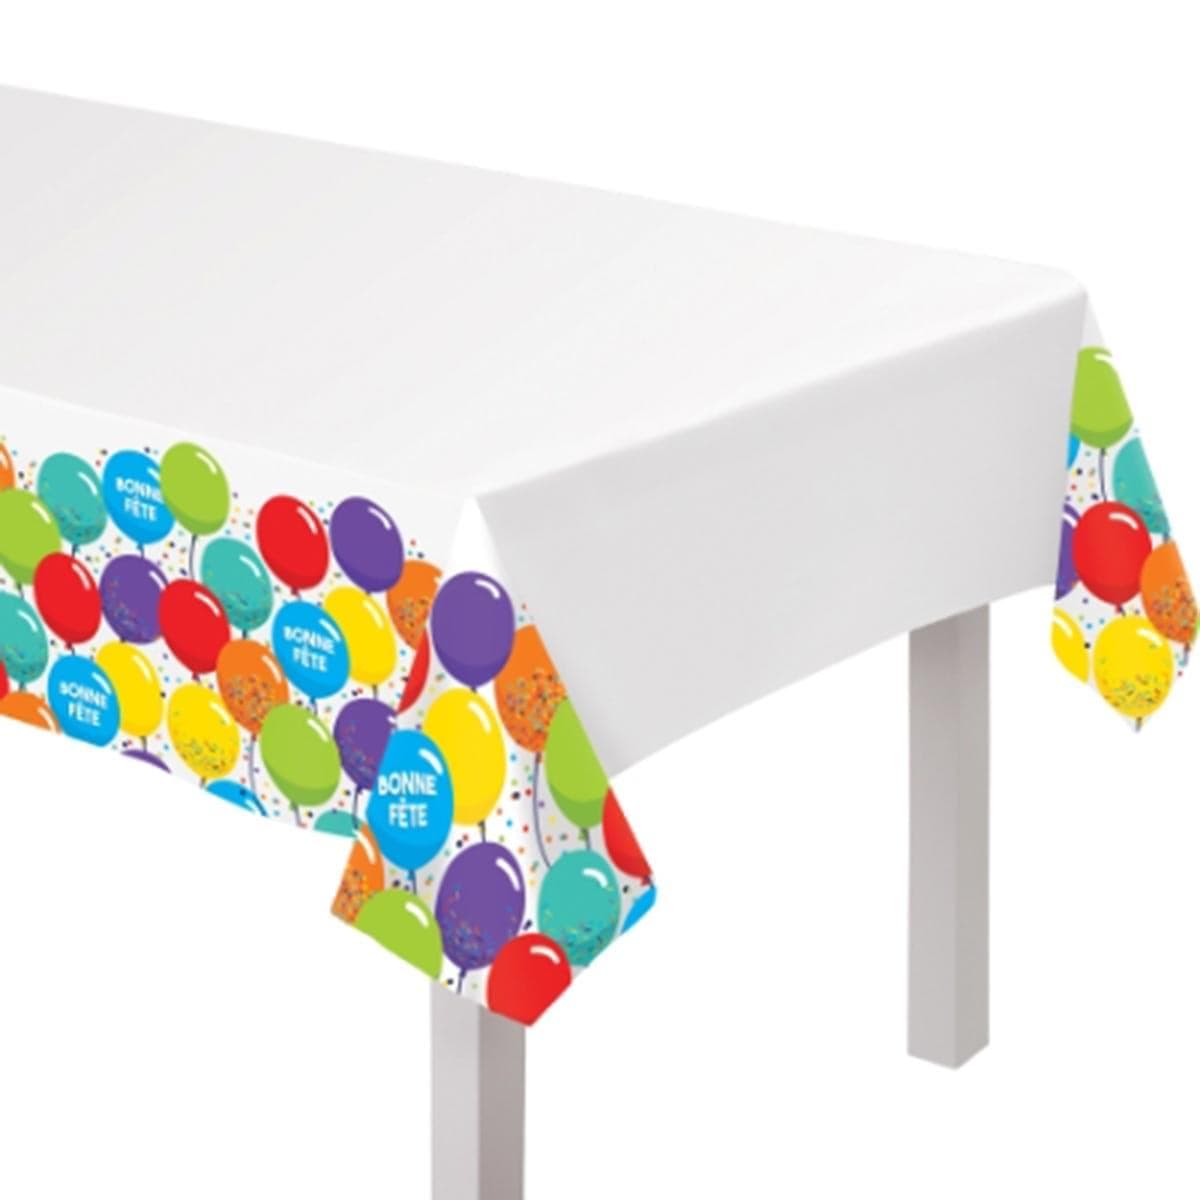 Buy General Birthday Bonne Fête Balloons - Tablecover sold at Party Expert